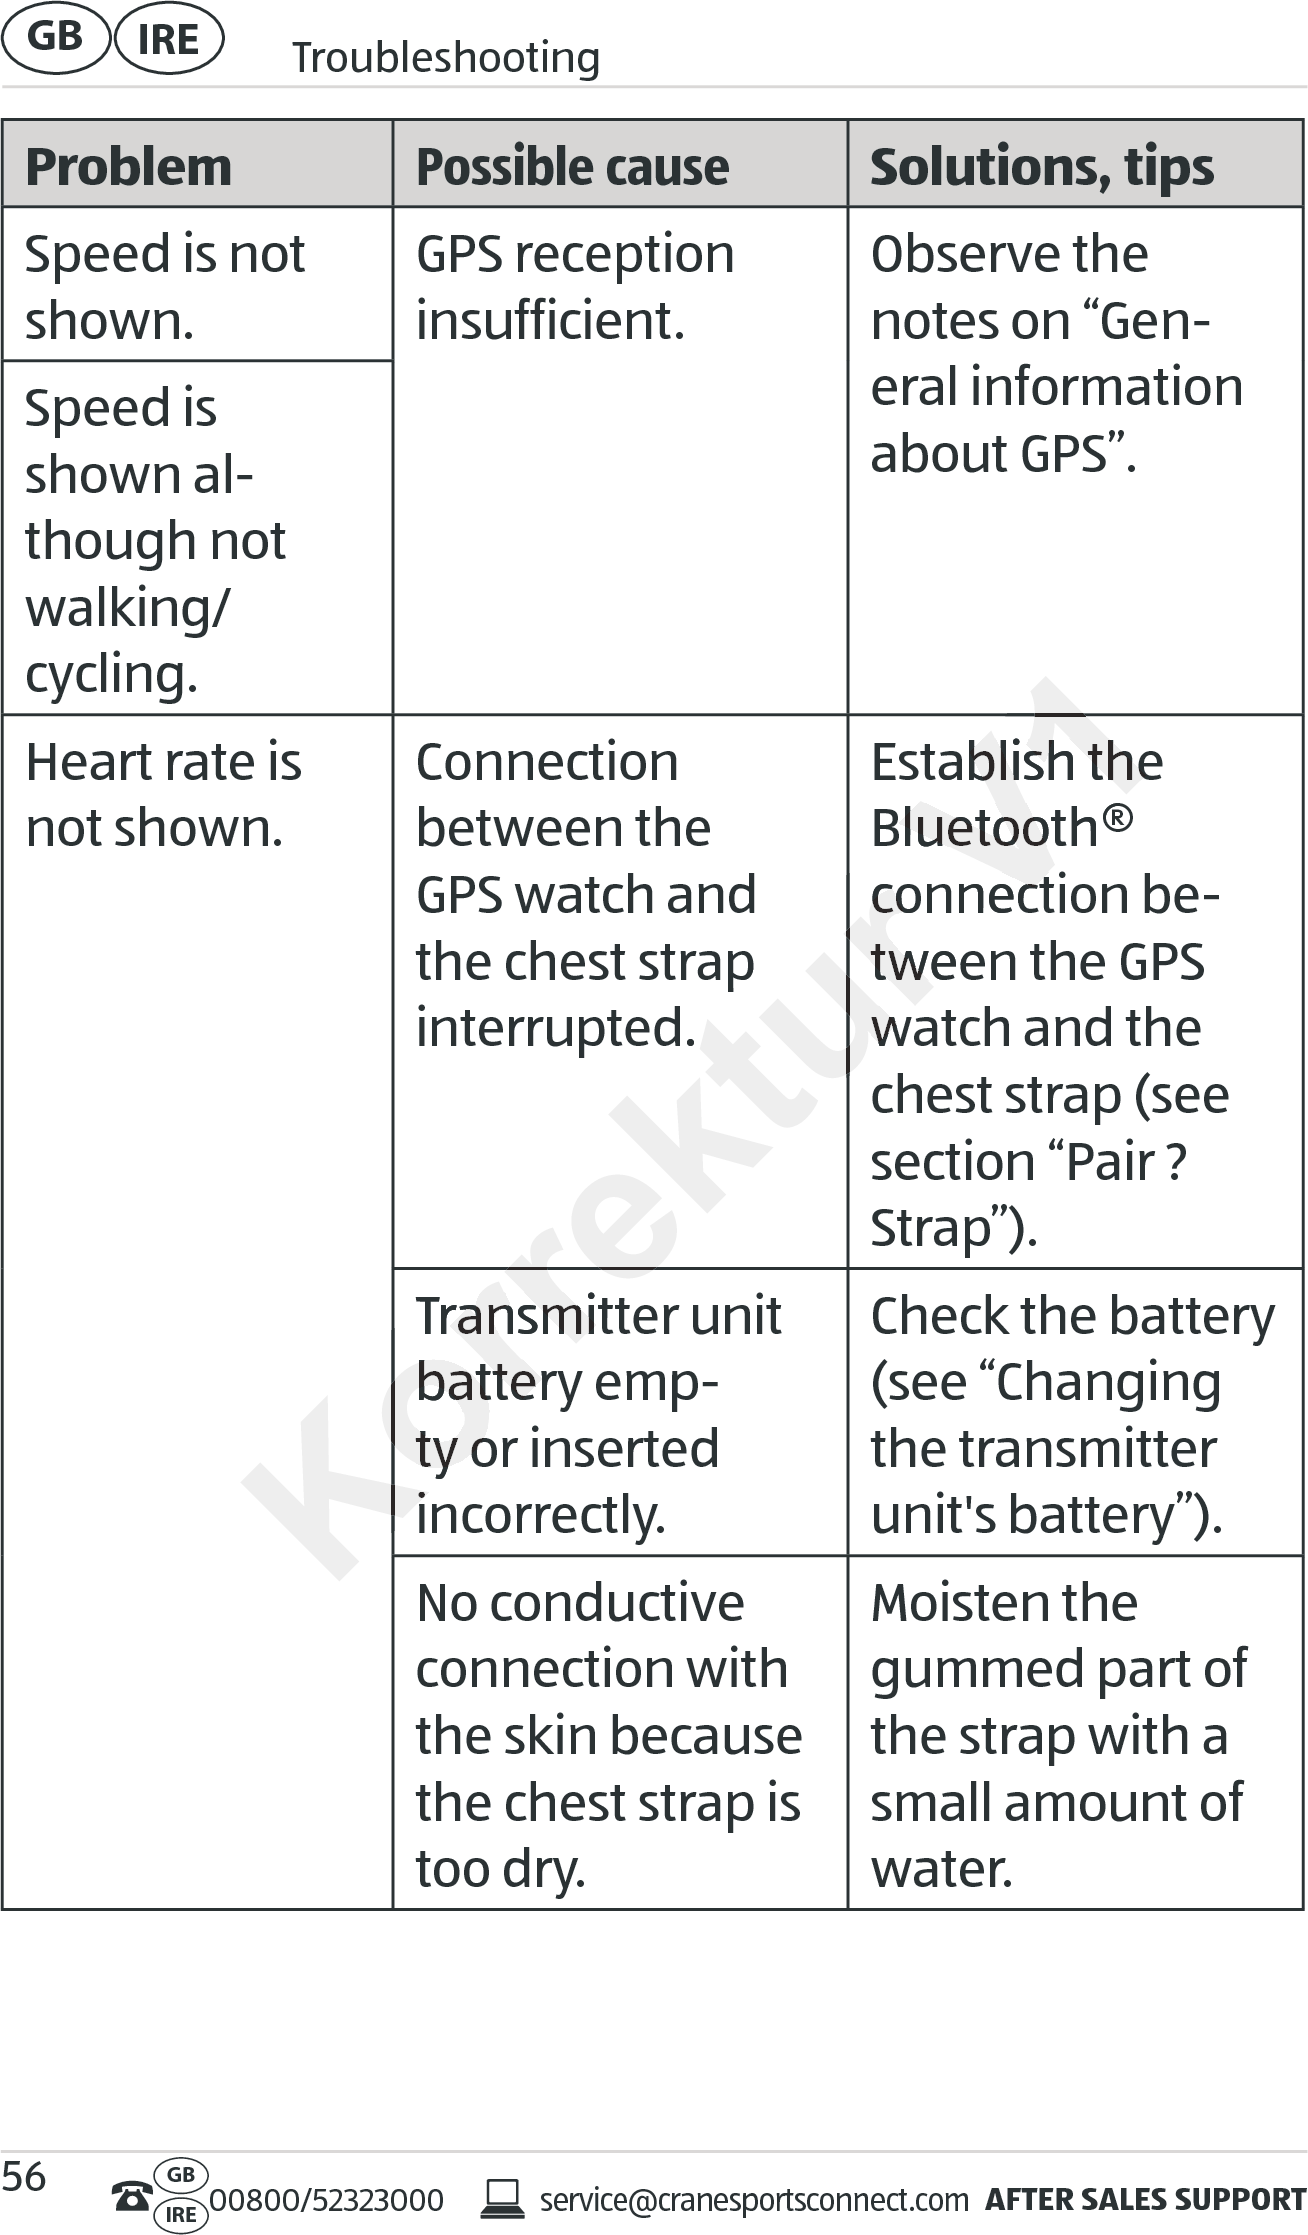 AFTER SALES SUPPORTservice@cranesportsconnect.comGBIRE 00800/52323000IRE TroubleshootingGB 56ProblemPossible causeSolutions, tipsSpeed is not shown.GPS reception insufficient.Observe the notes on “Gen-eral information about GPS”.Speed is shown al-though not walking/cycling.Heart rate is not shown.Connection between the GPS watch and the chest strap interrupted.Establish the Bluetooth®  connection be-tween the GPS watch and the chest strap (see section “Pair ? Strap”).Transmitter unit battery emp-ty or inserted incorrectly.Check the battery (see “Changing the transmitter unit&apos;s battery”).No conductive connection with the skin because the chest strap is too dry.Moisten the gummed part of the strap with a small amount of water.Korrektur Korrektur Korrektur Korrektur the chest strap interrupted.connection beconnection between the GPS tween the GPS watch and the watch and the Transmitter unit Transmitter unit battery empbattery empty or inserted ty or inserted incorrectly.incorrectly.V1V1Establish the Establish the Bluetooth® Bluetooth® connection beconnection be